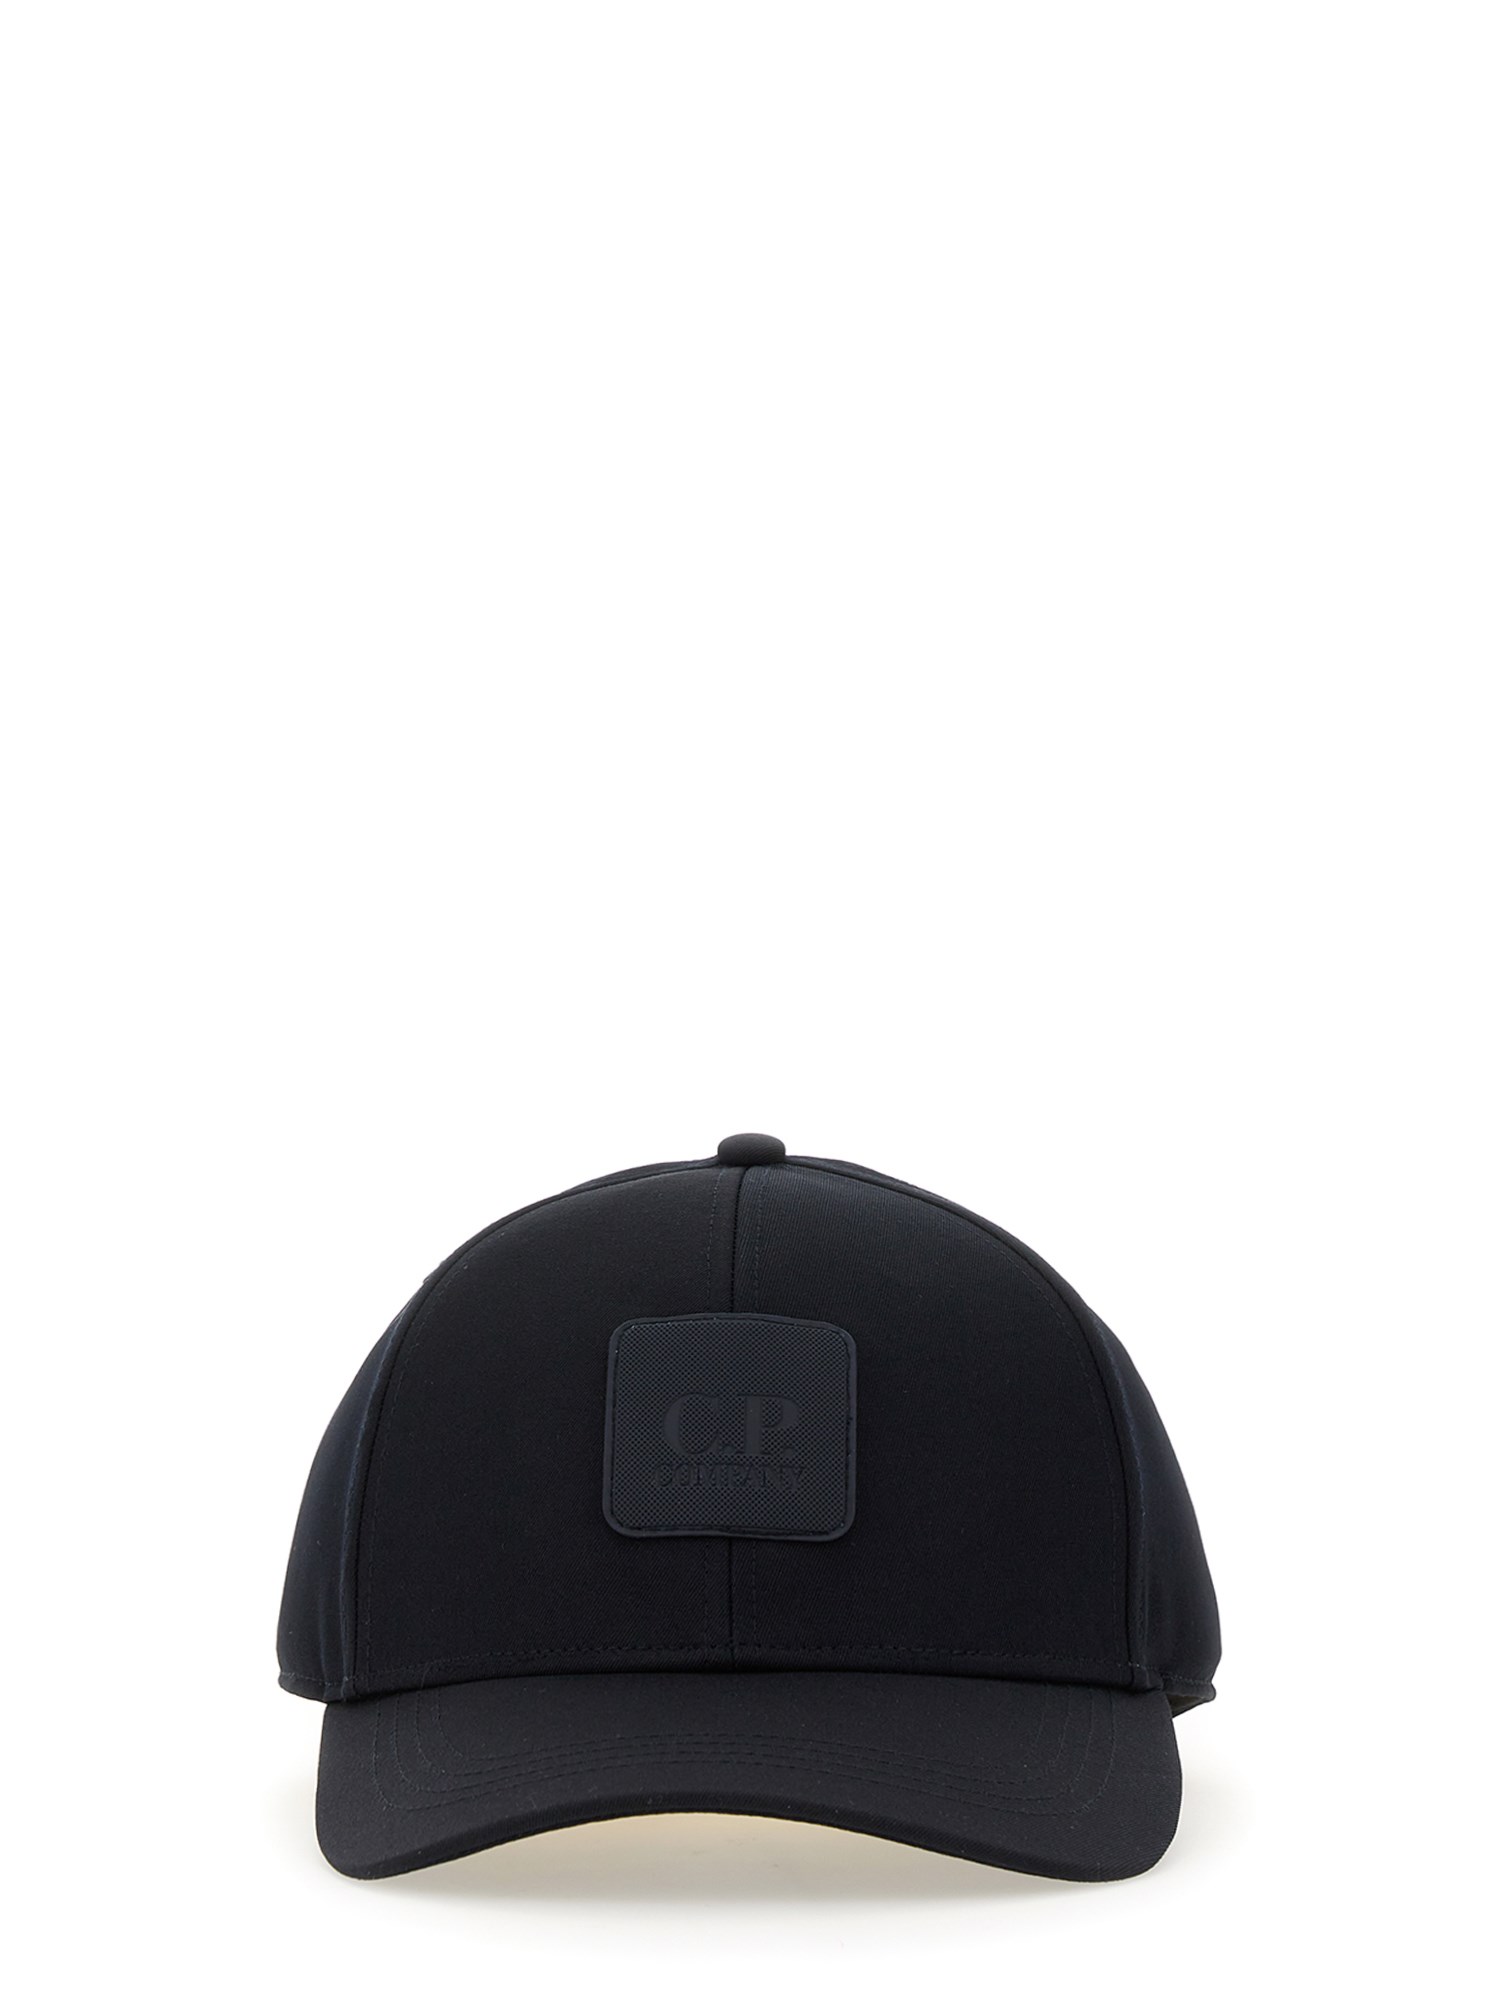 c.p. company baseball hat with logo patch